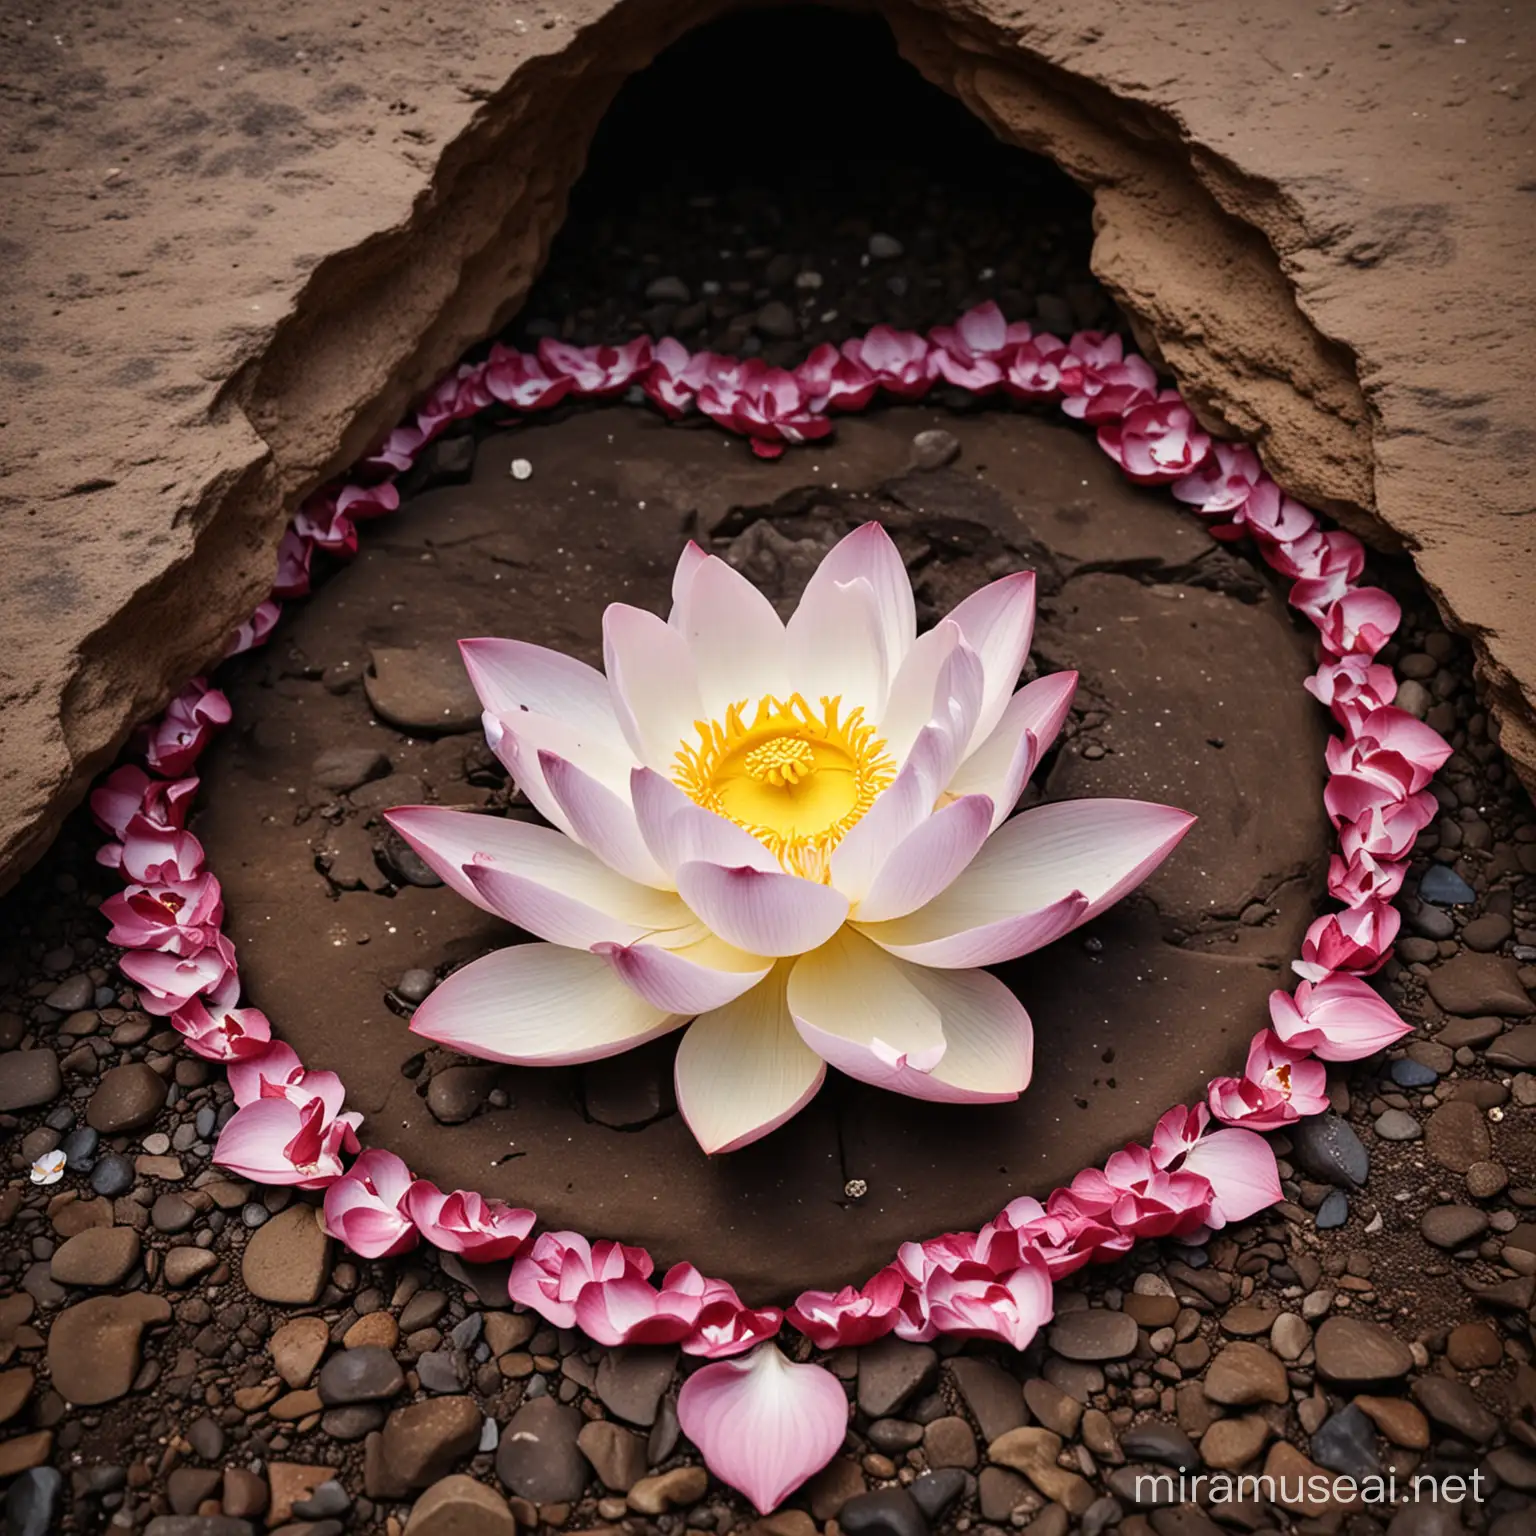 Lotus Flower Cave Dance of Clarity and Emotion